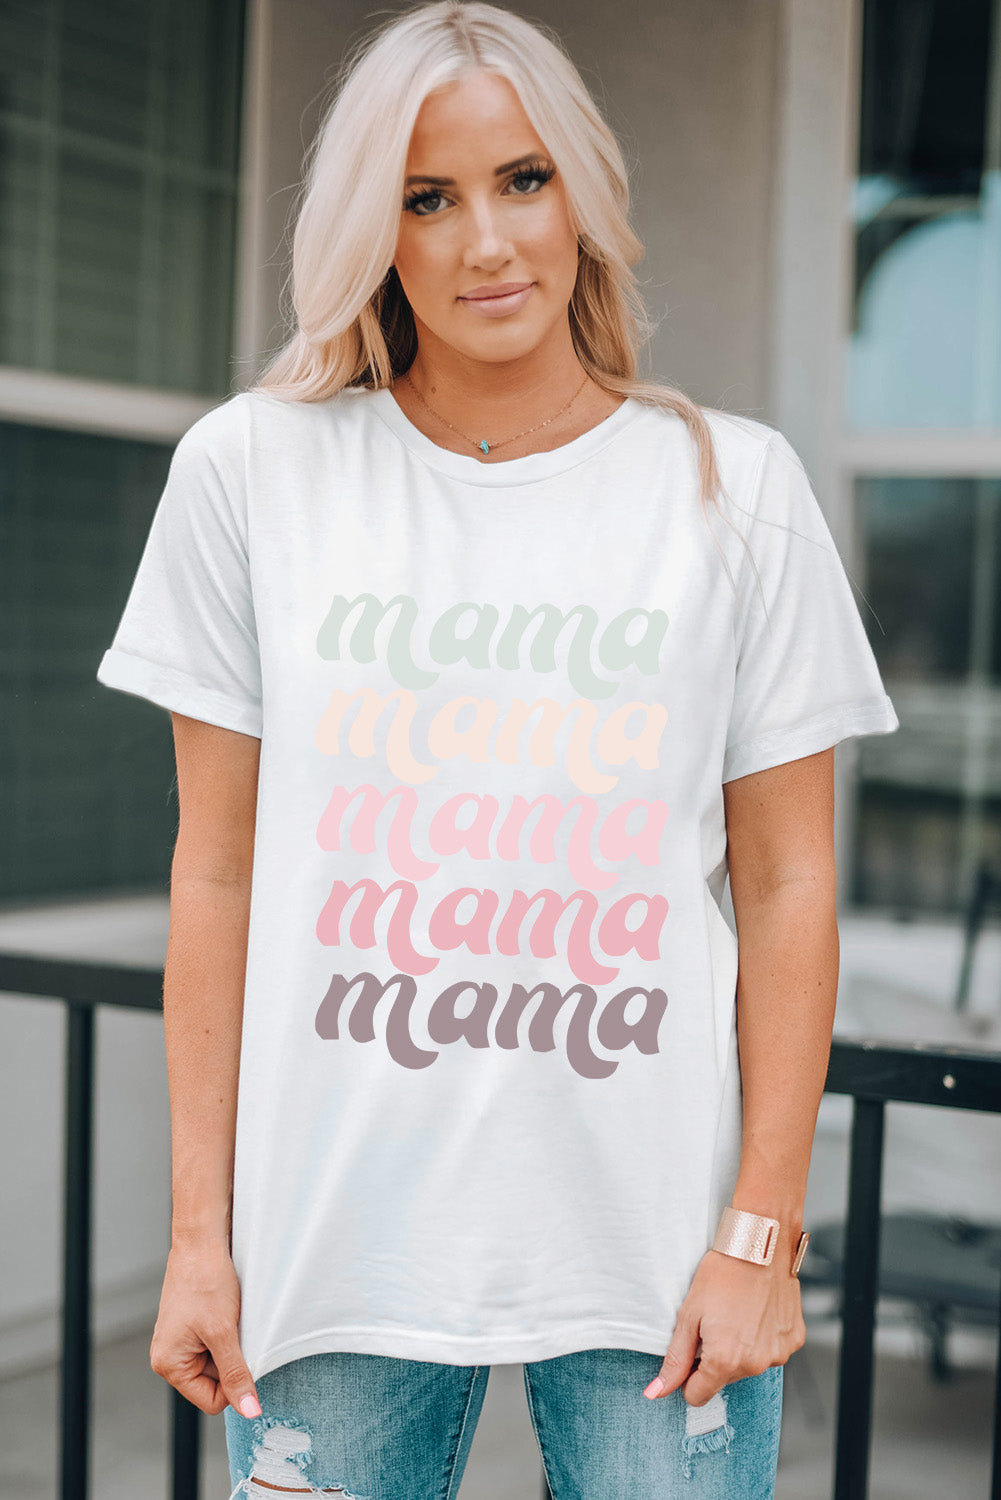 Multicolor Ombre MAMA Graphic Top Short Sleeve Tee Shirt (Plus Size Available)